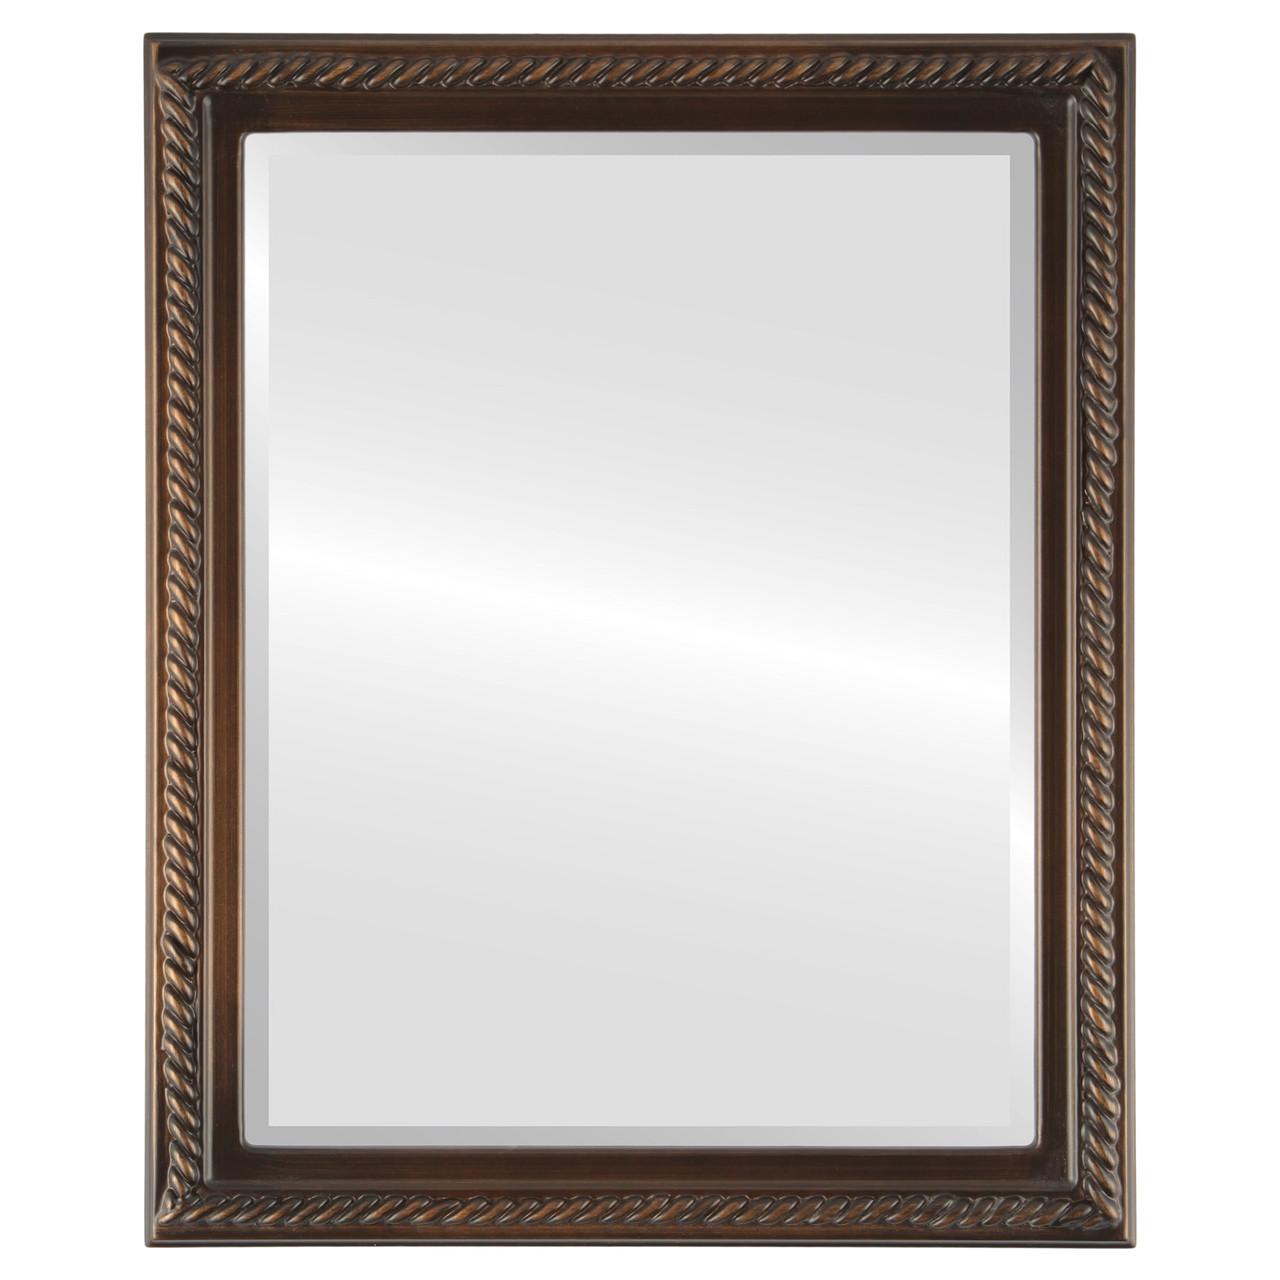 Oval Beveled Wall Mirror for Home Decor Santa Fe Style Rubbed Bronze - 3